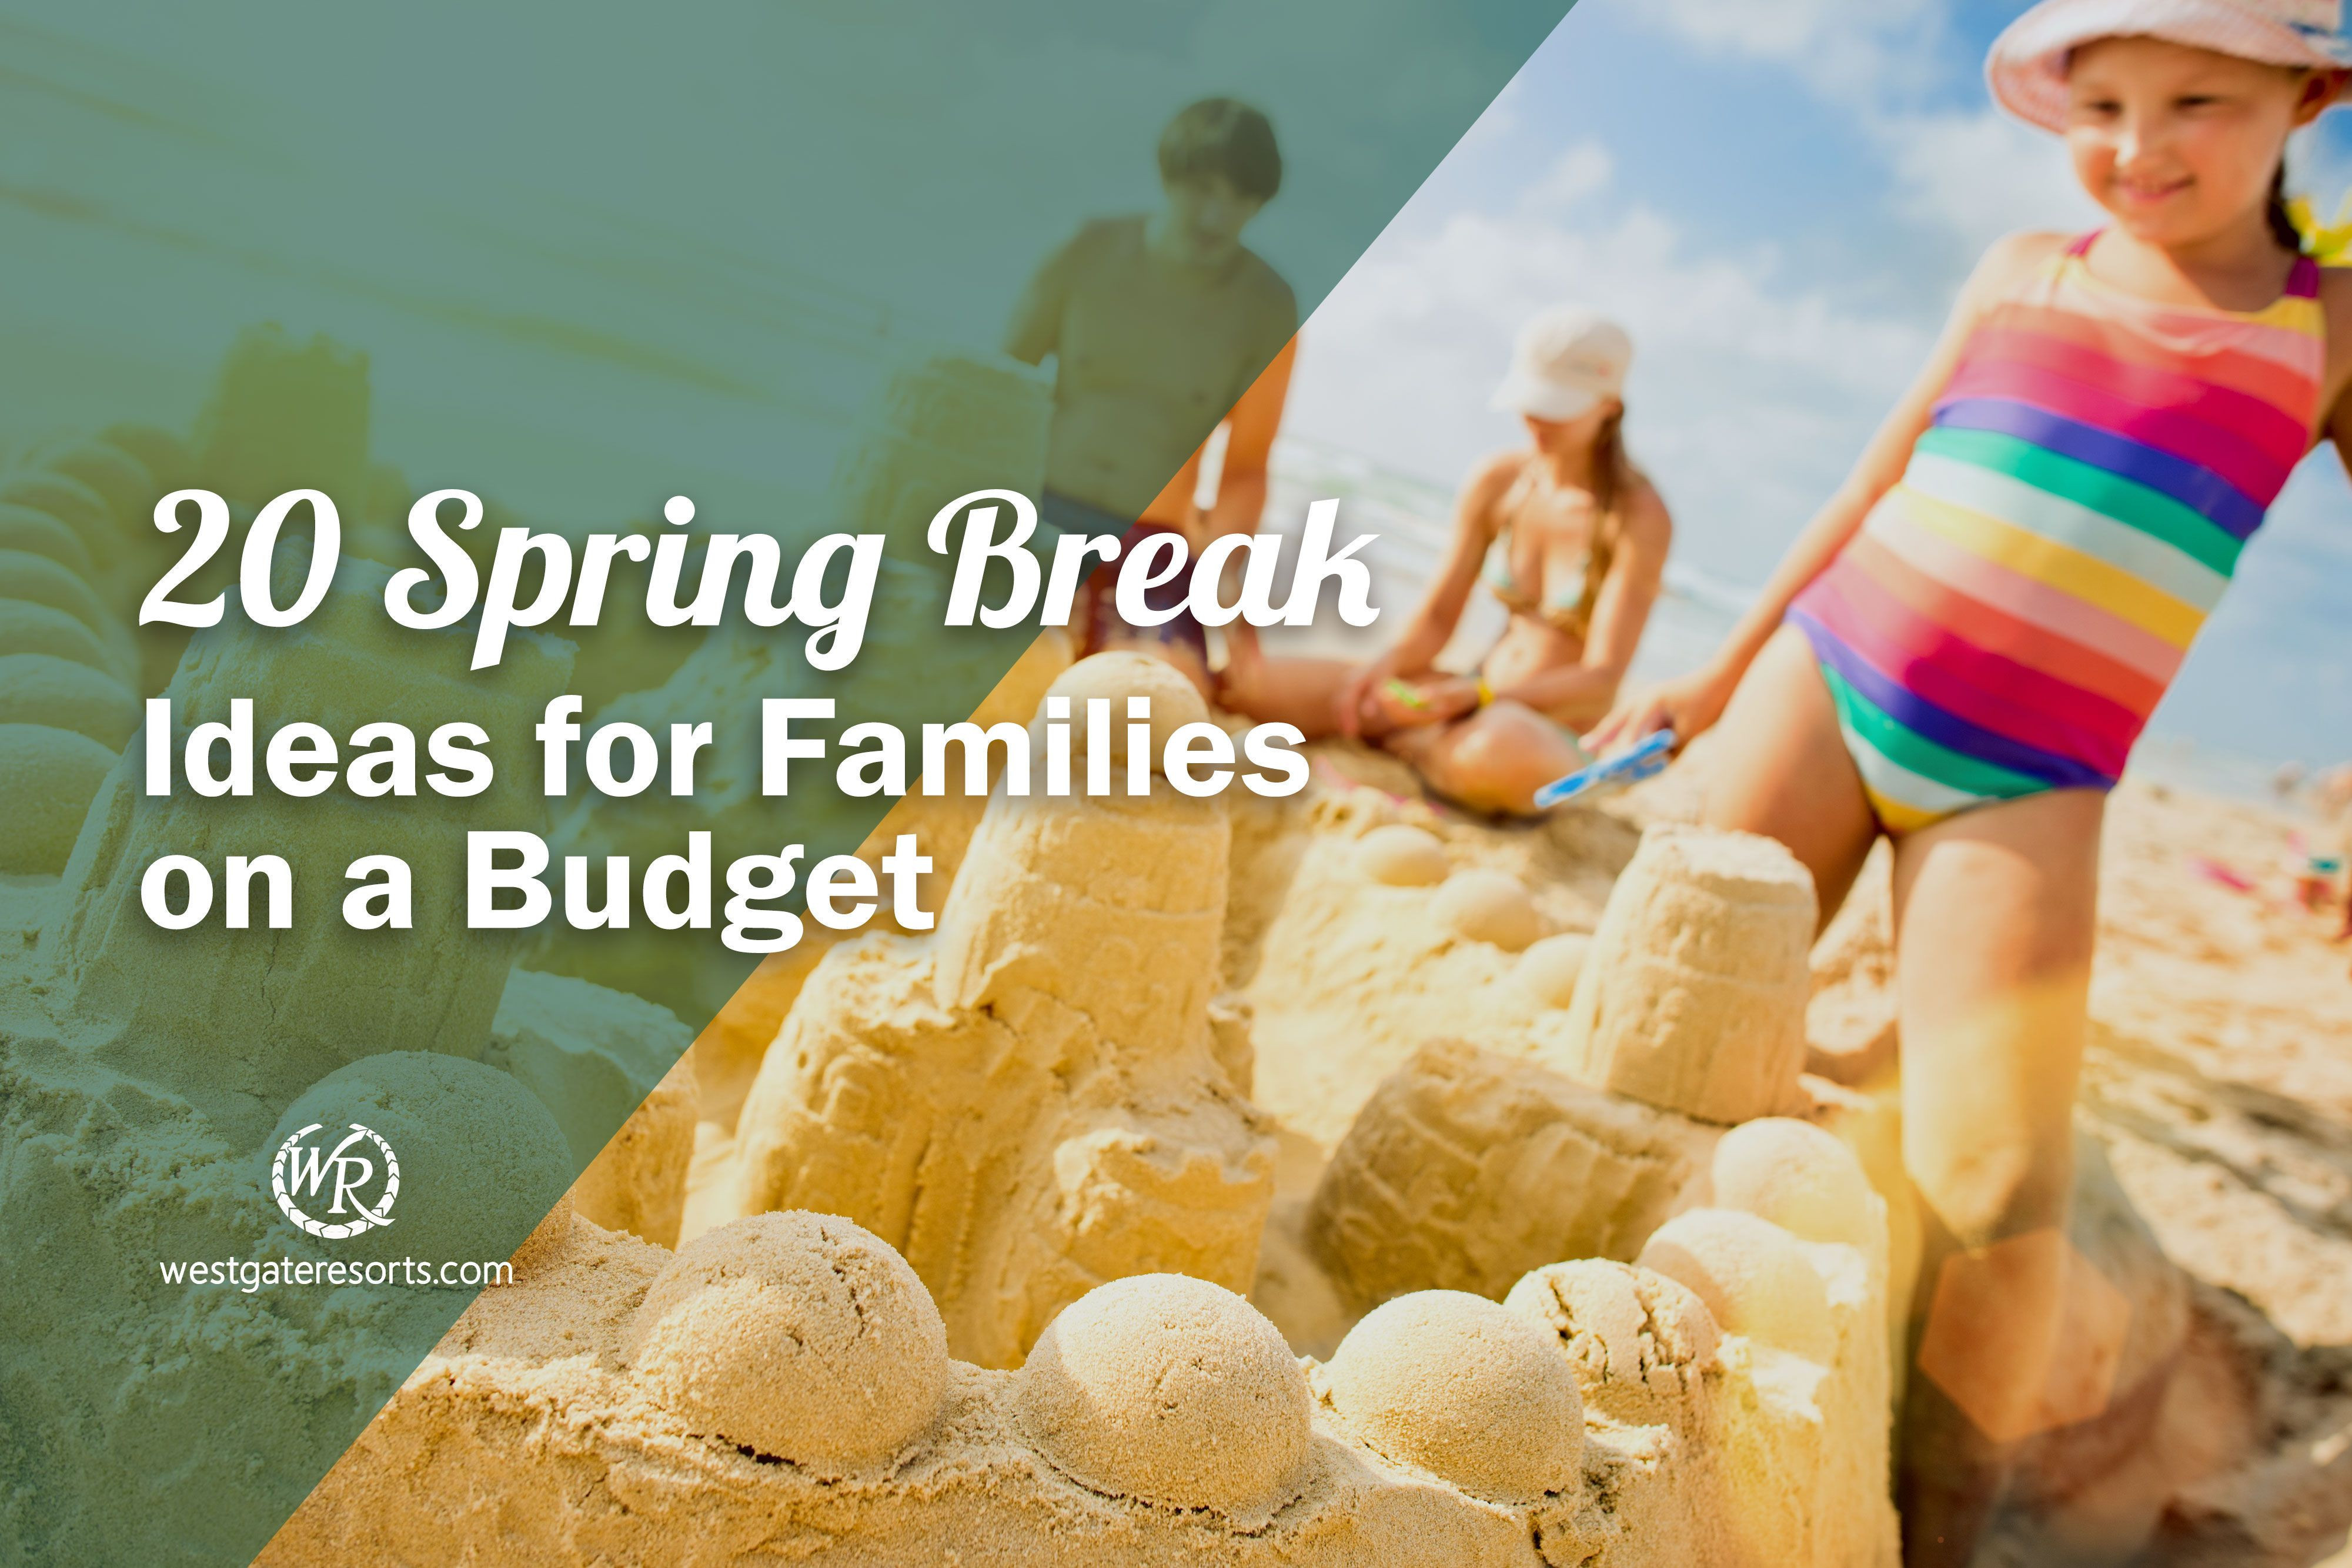 20 Spring Break Ideas for Families on a Budget